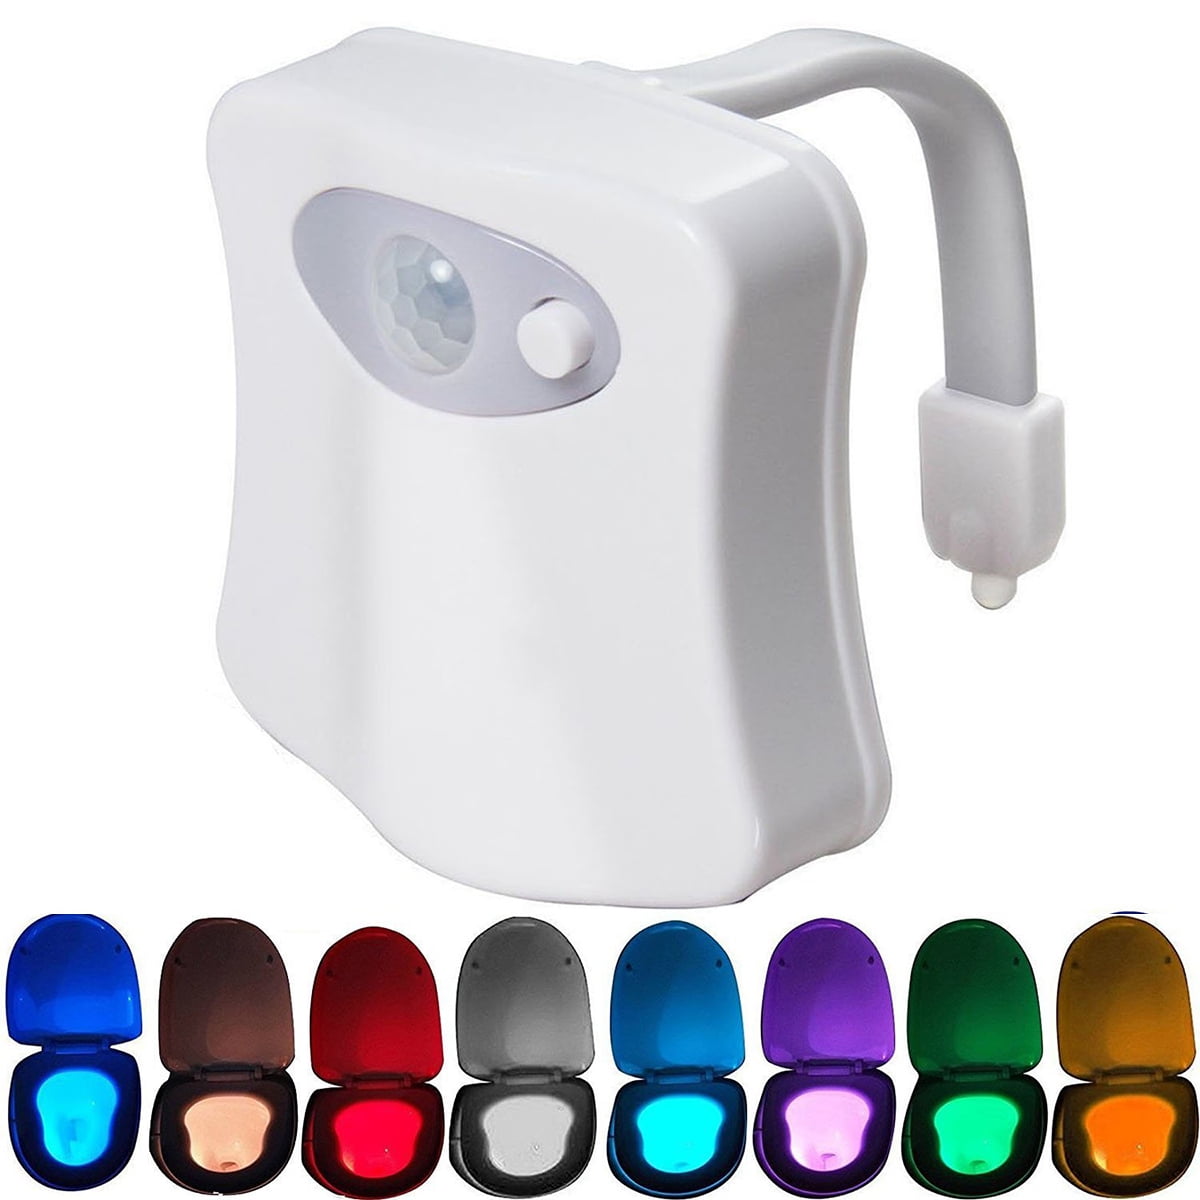 8 Color Toilet Bowl Night Light LED Motion Activated – Talk to the Wilson